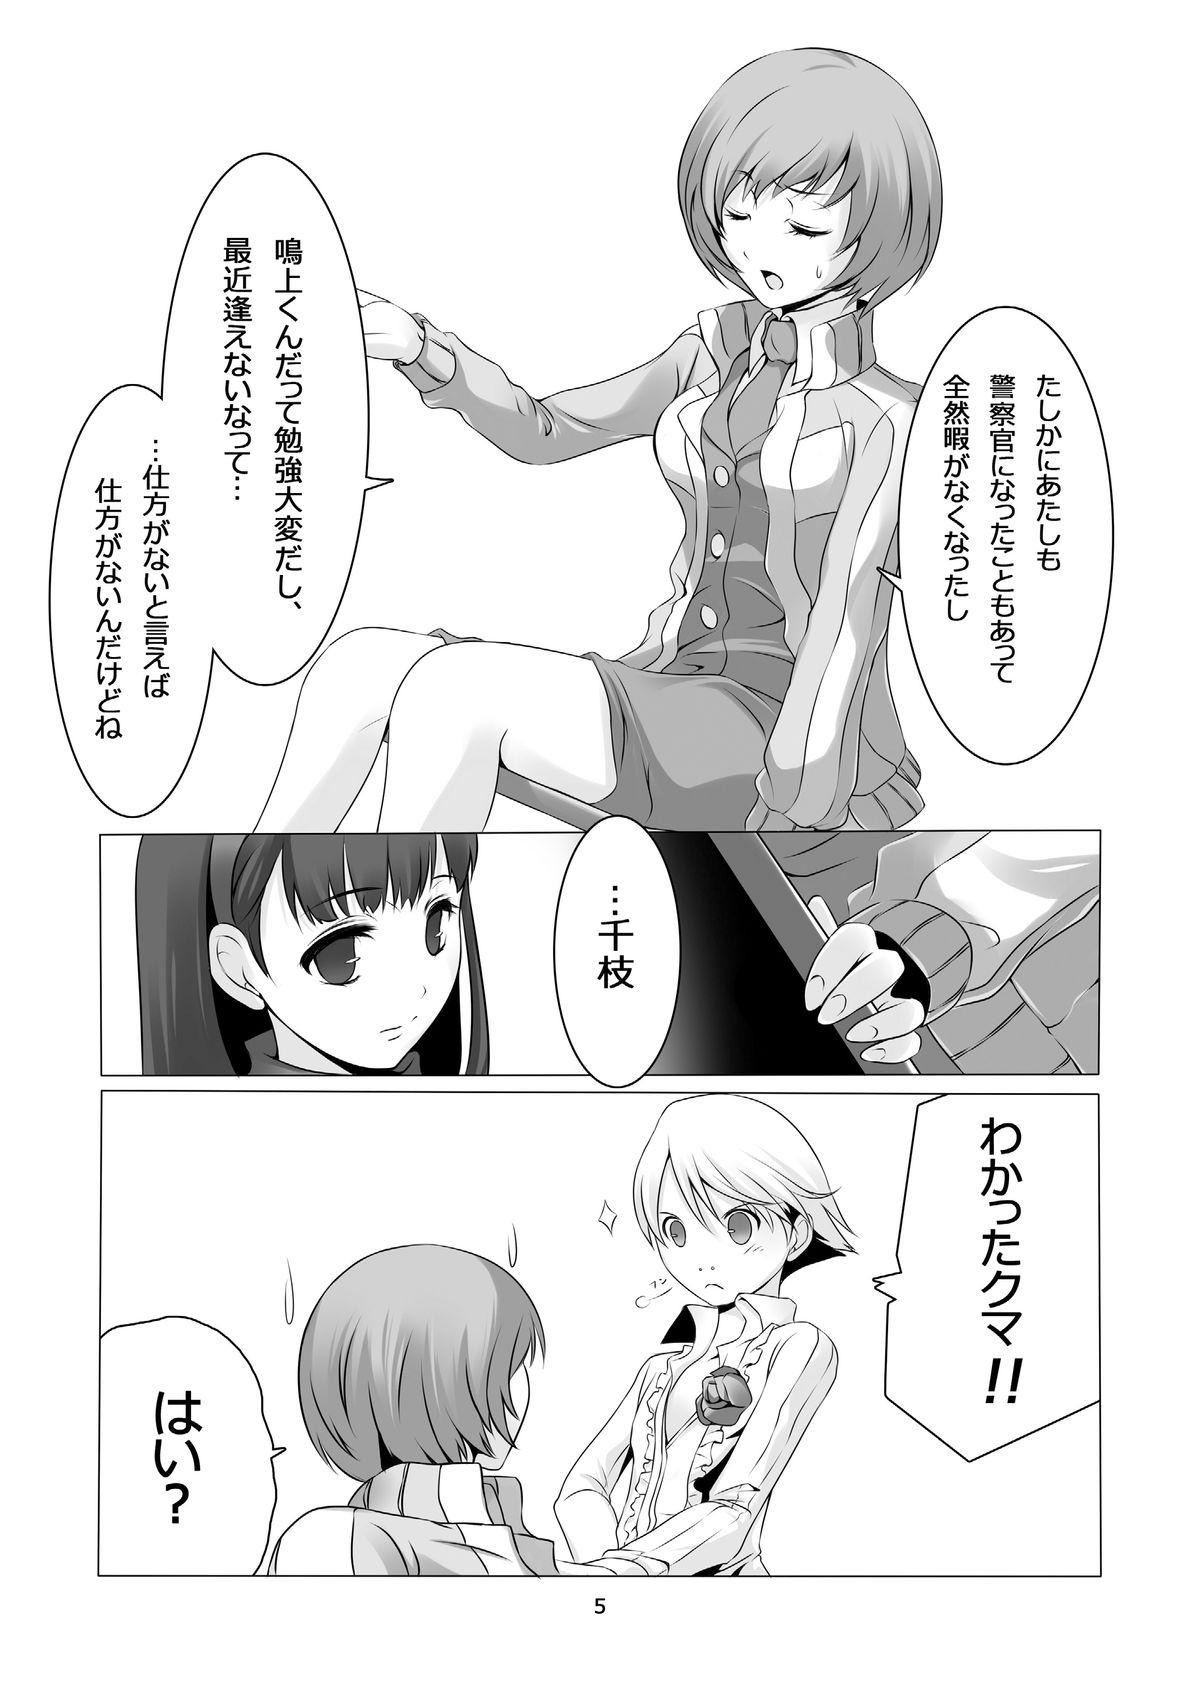 Anal Sex Persona 4: The Doujin #2 - Persona 4 Beurette - Page 7